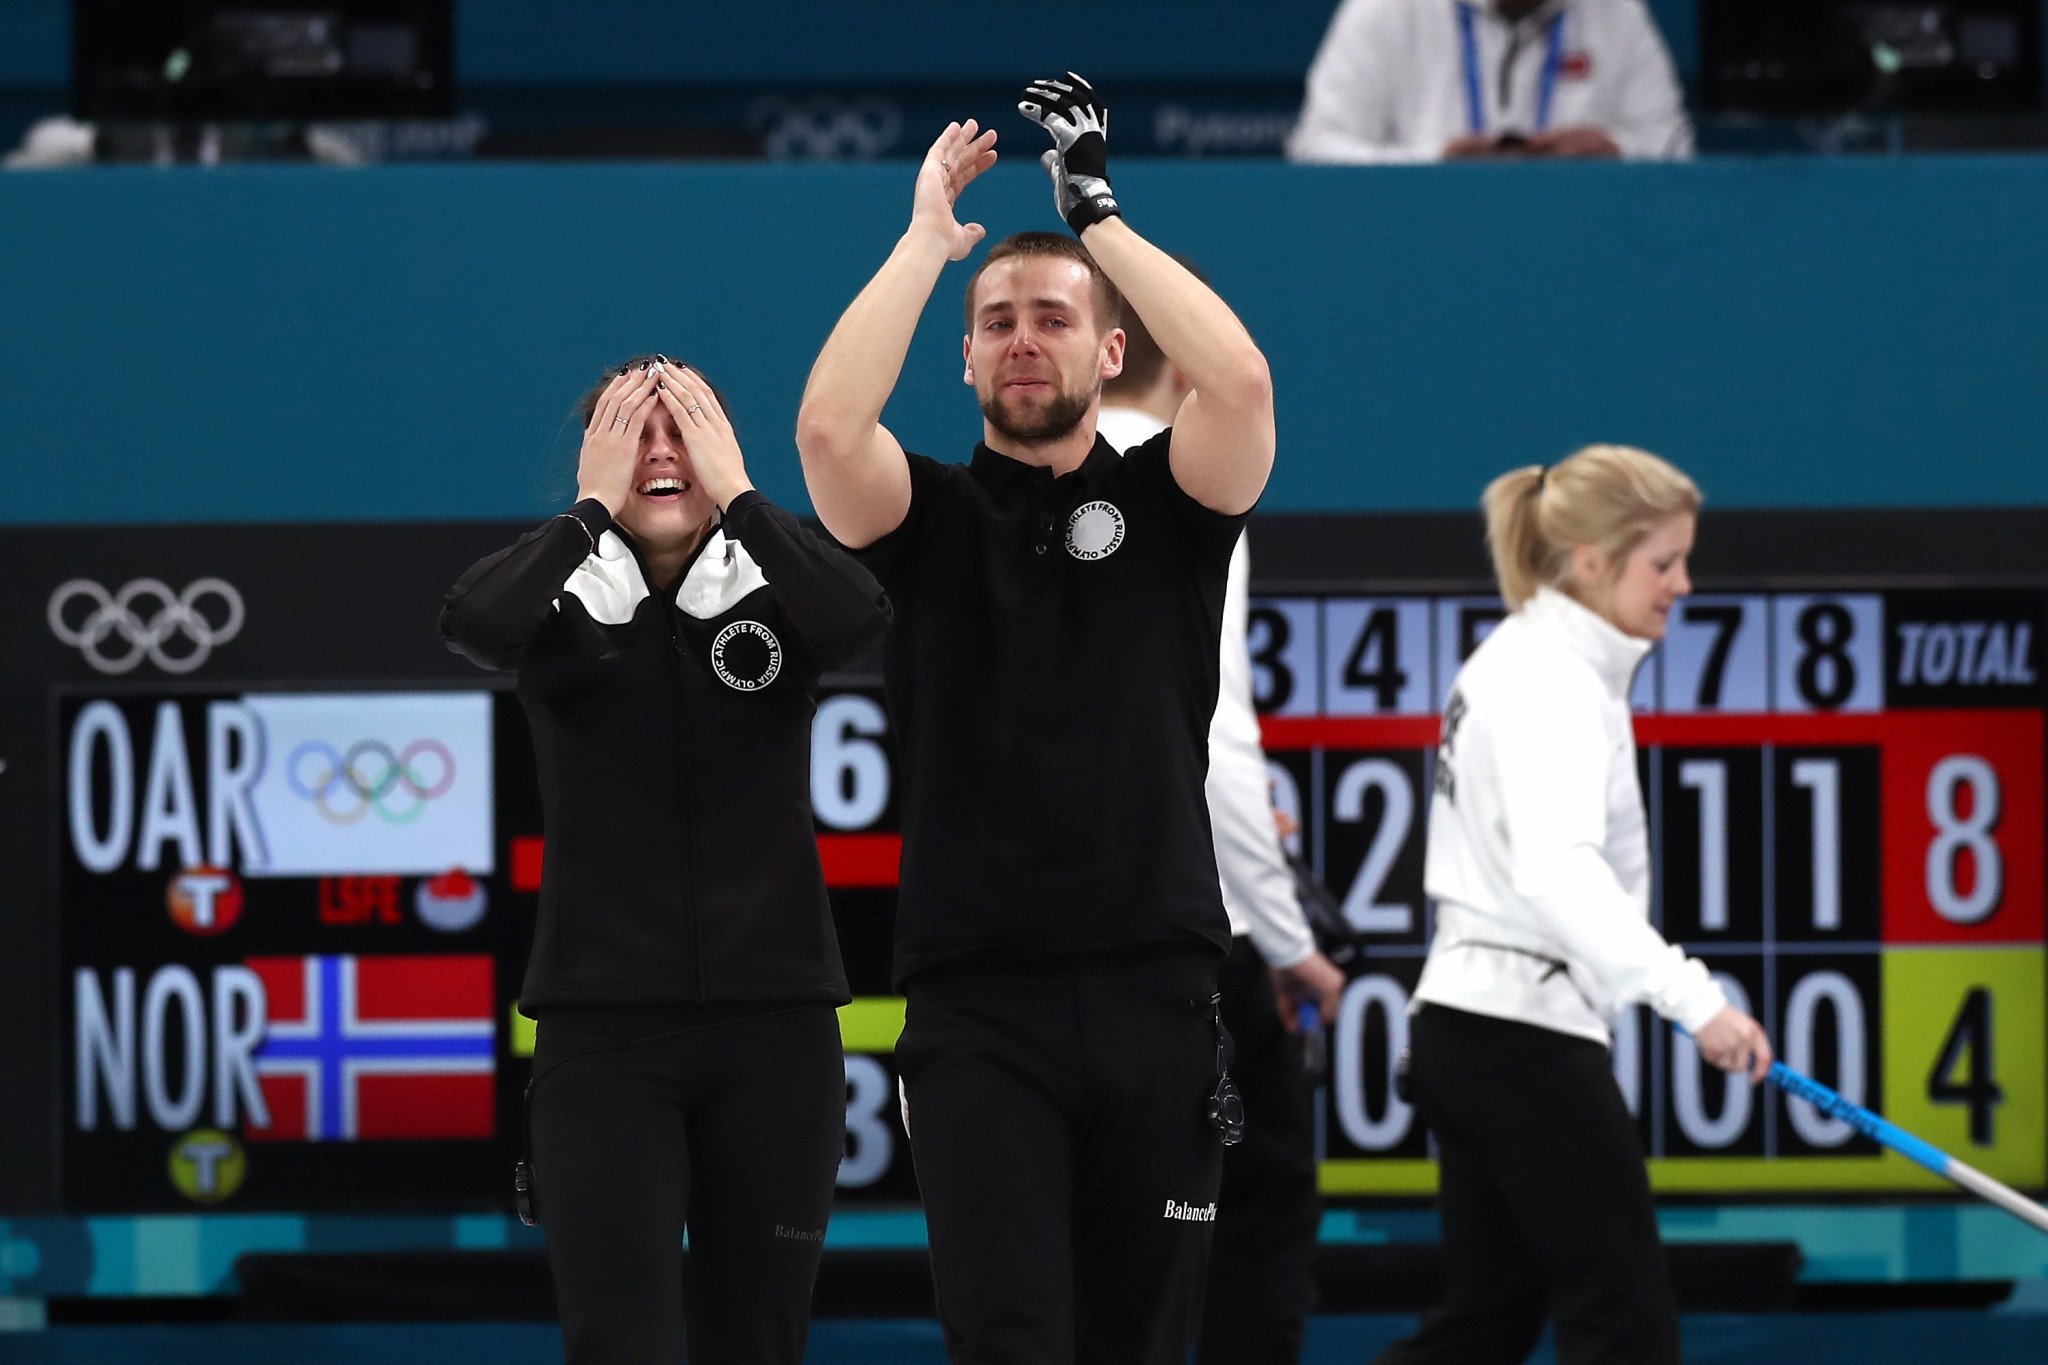 Aleksandr Krushelnitckii and wife Anastasia Bryzgalova were stripped of their Olympic mixed doubles curling bronze medals ©Getty Images